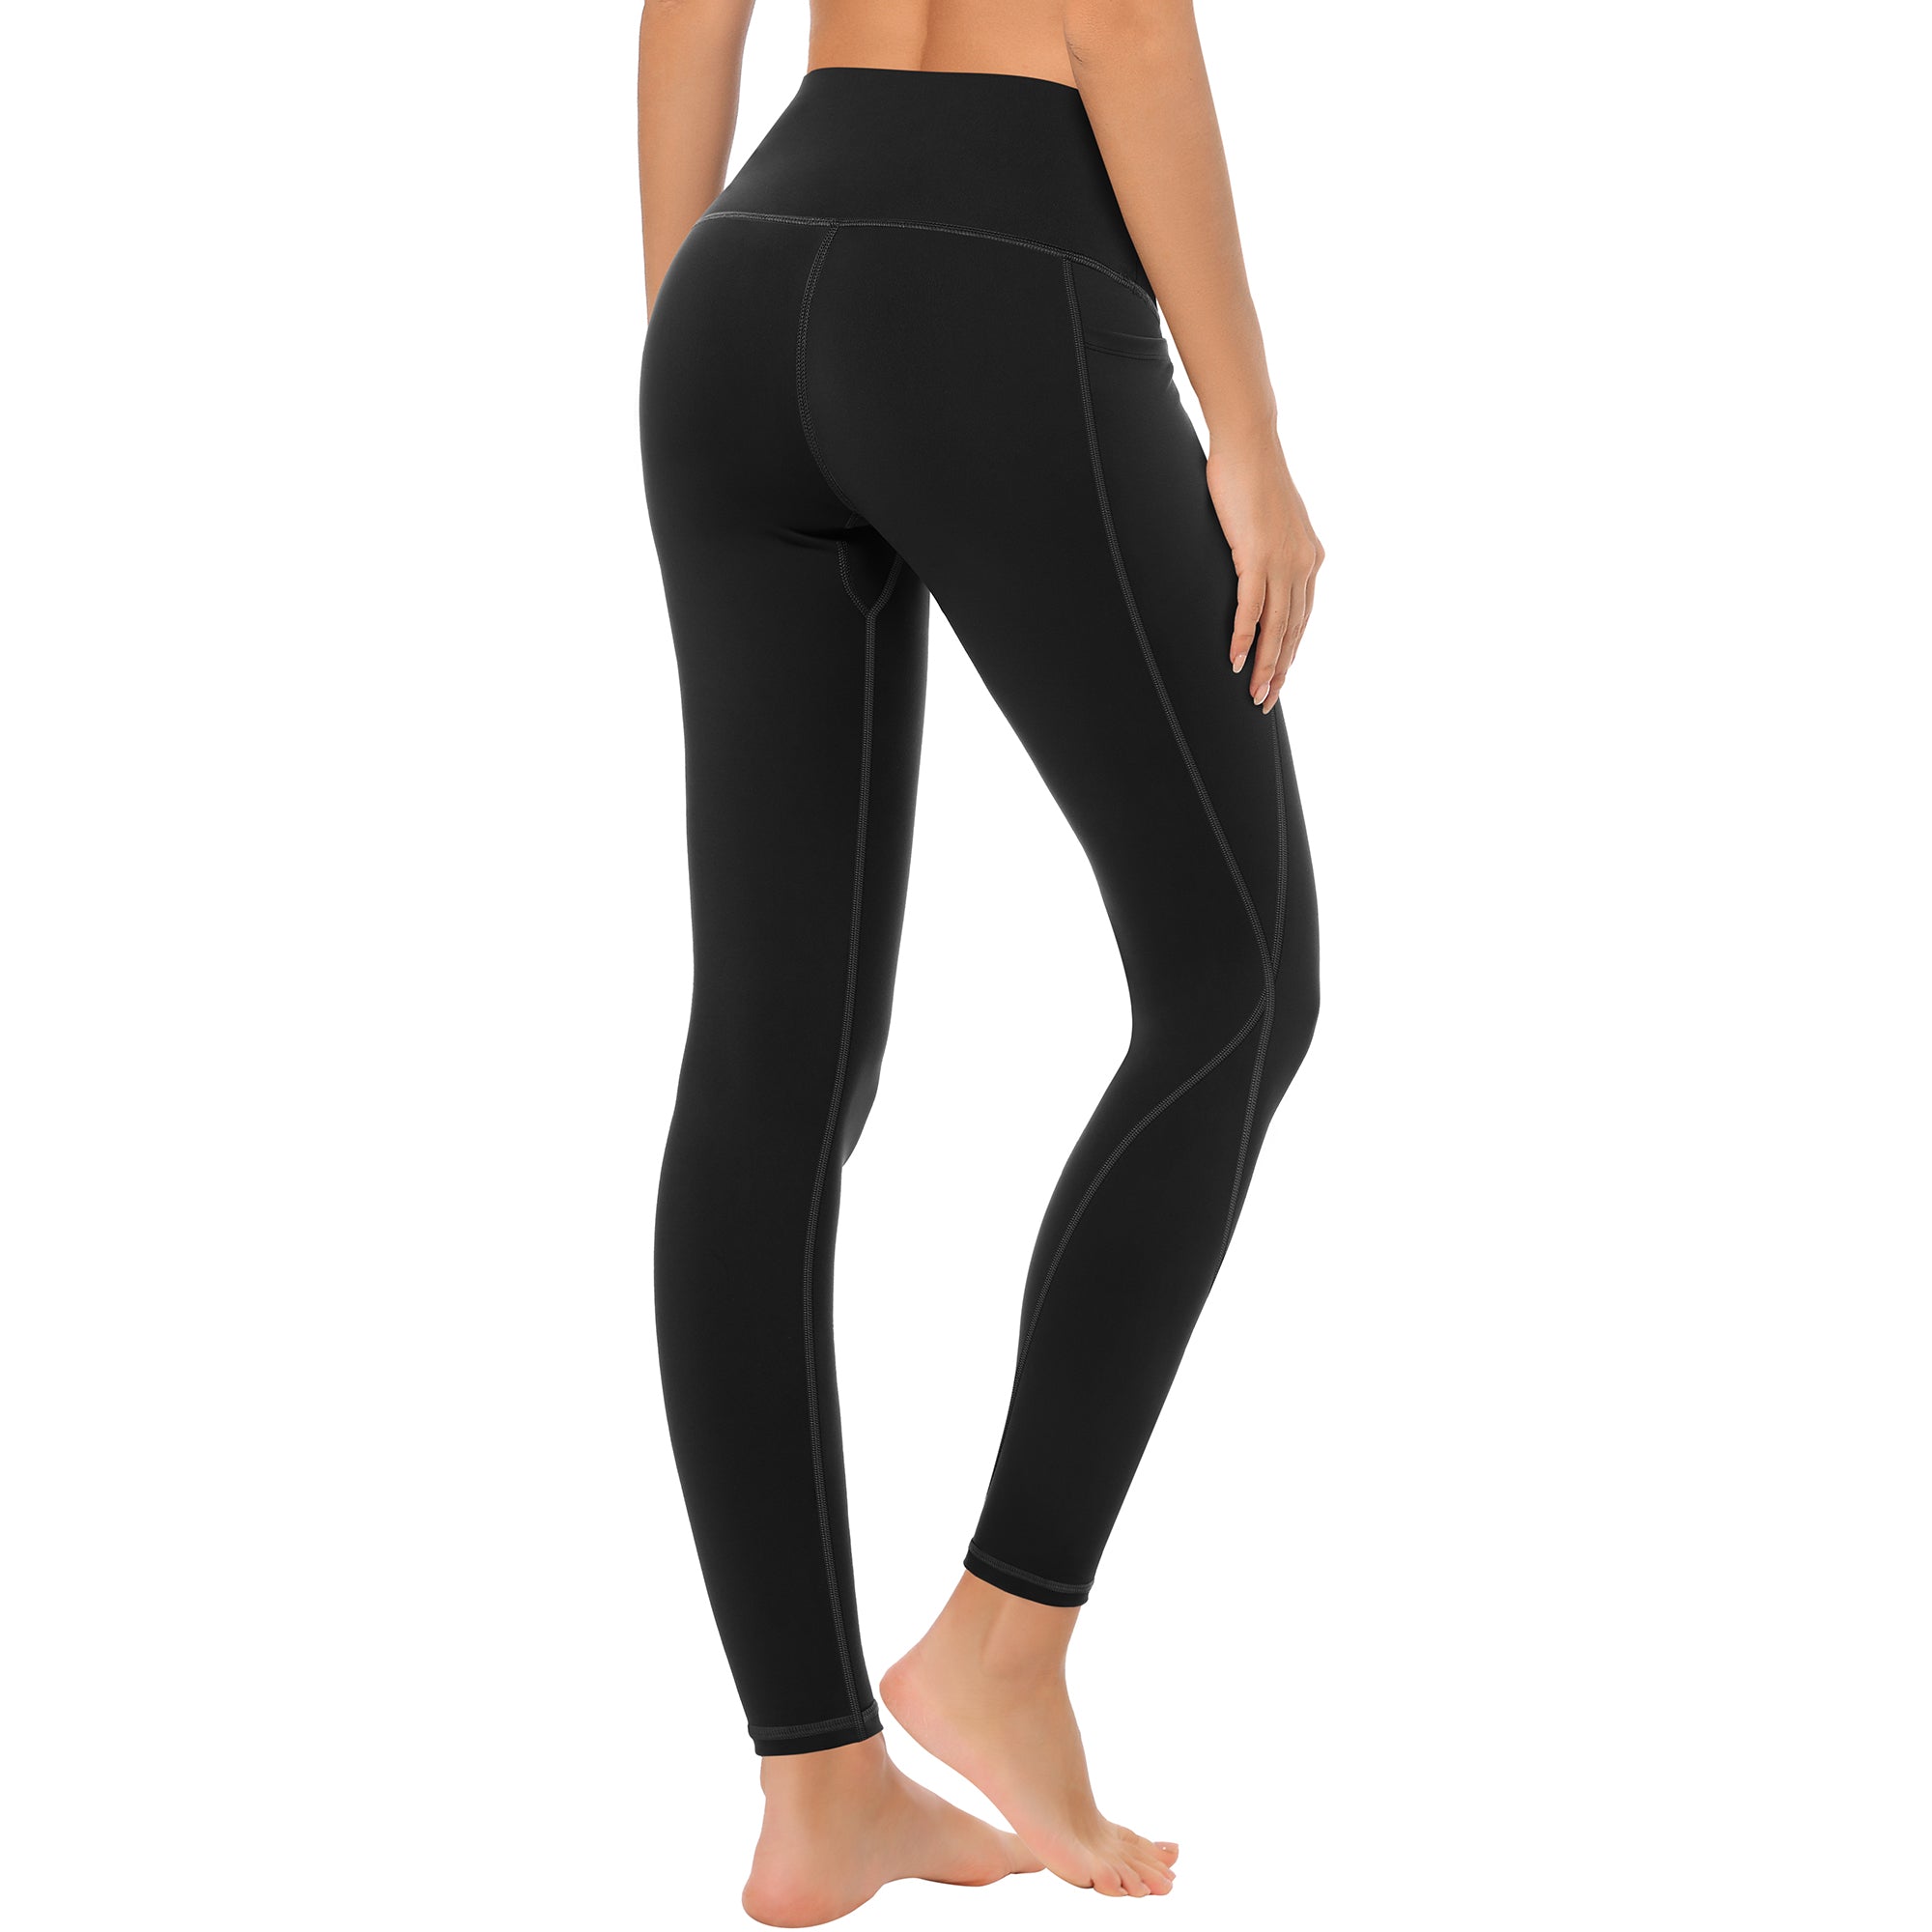 GOFIEP Yoga Leggings with Pockets for Women - High Waist Tummy Control Pants for Workout